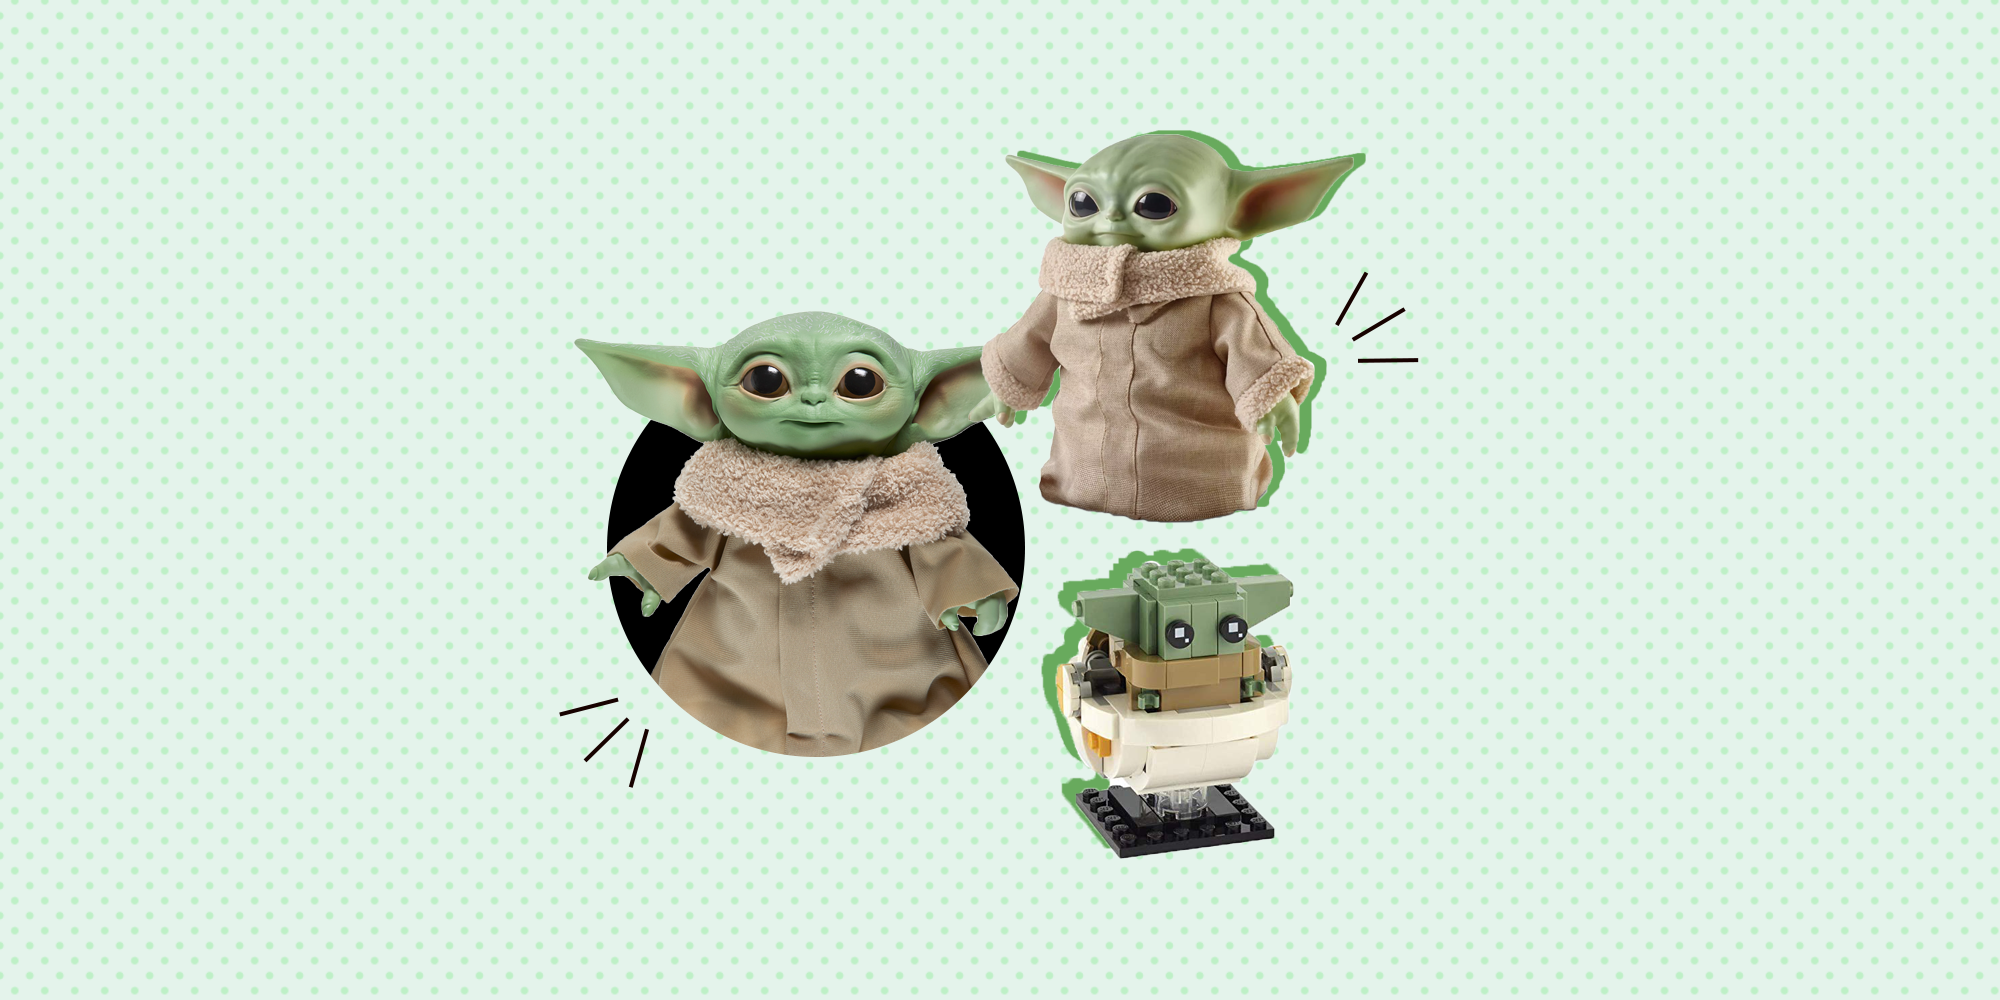 15 Baby Yoda Toys 21 The Child From The Mandalorian Plushes Figures And Games